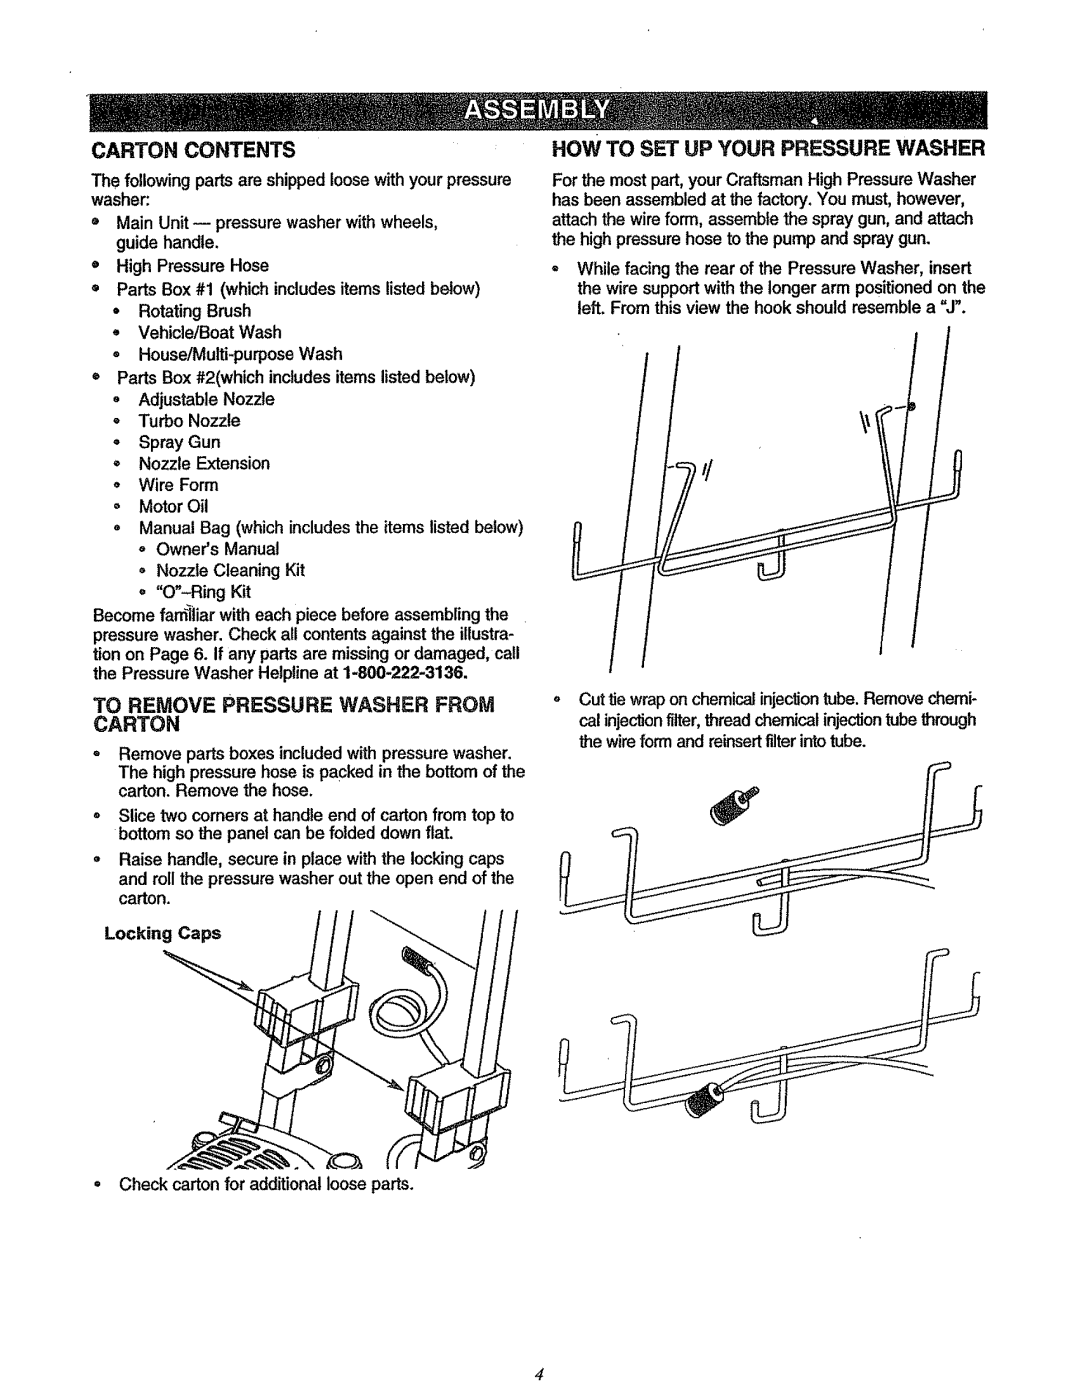 Craftsman 580.7622 manual How TO SET UP YOUR PRESSURE WASHER, Carton Contents 